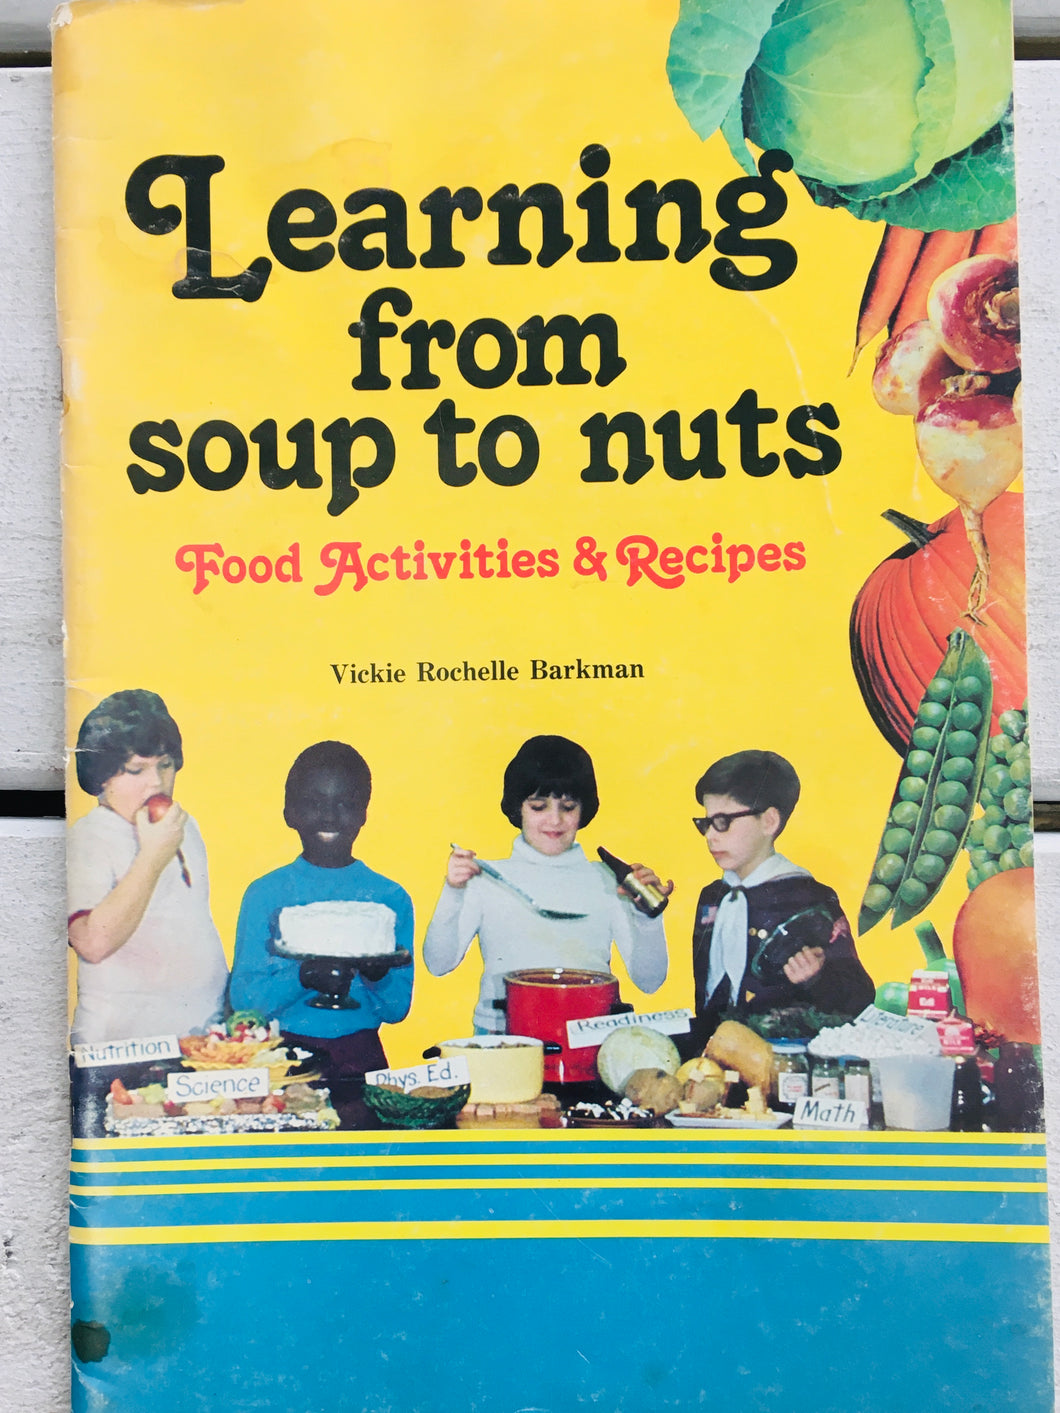 Learning From Soup to Nuts by Vickie Rochelle Barkman